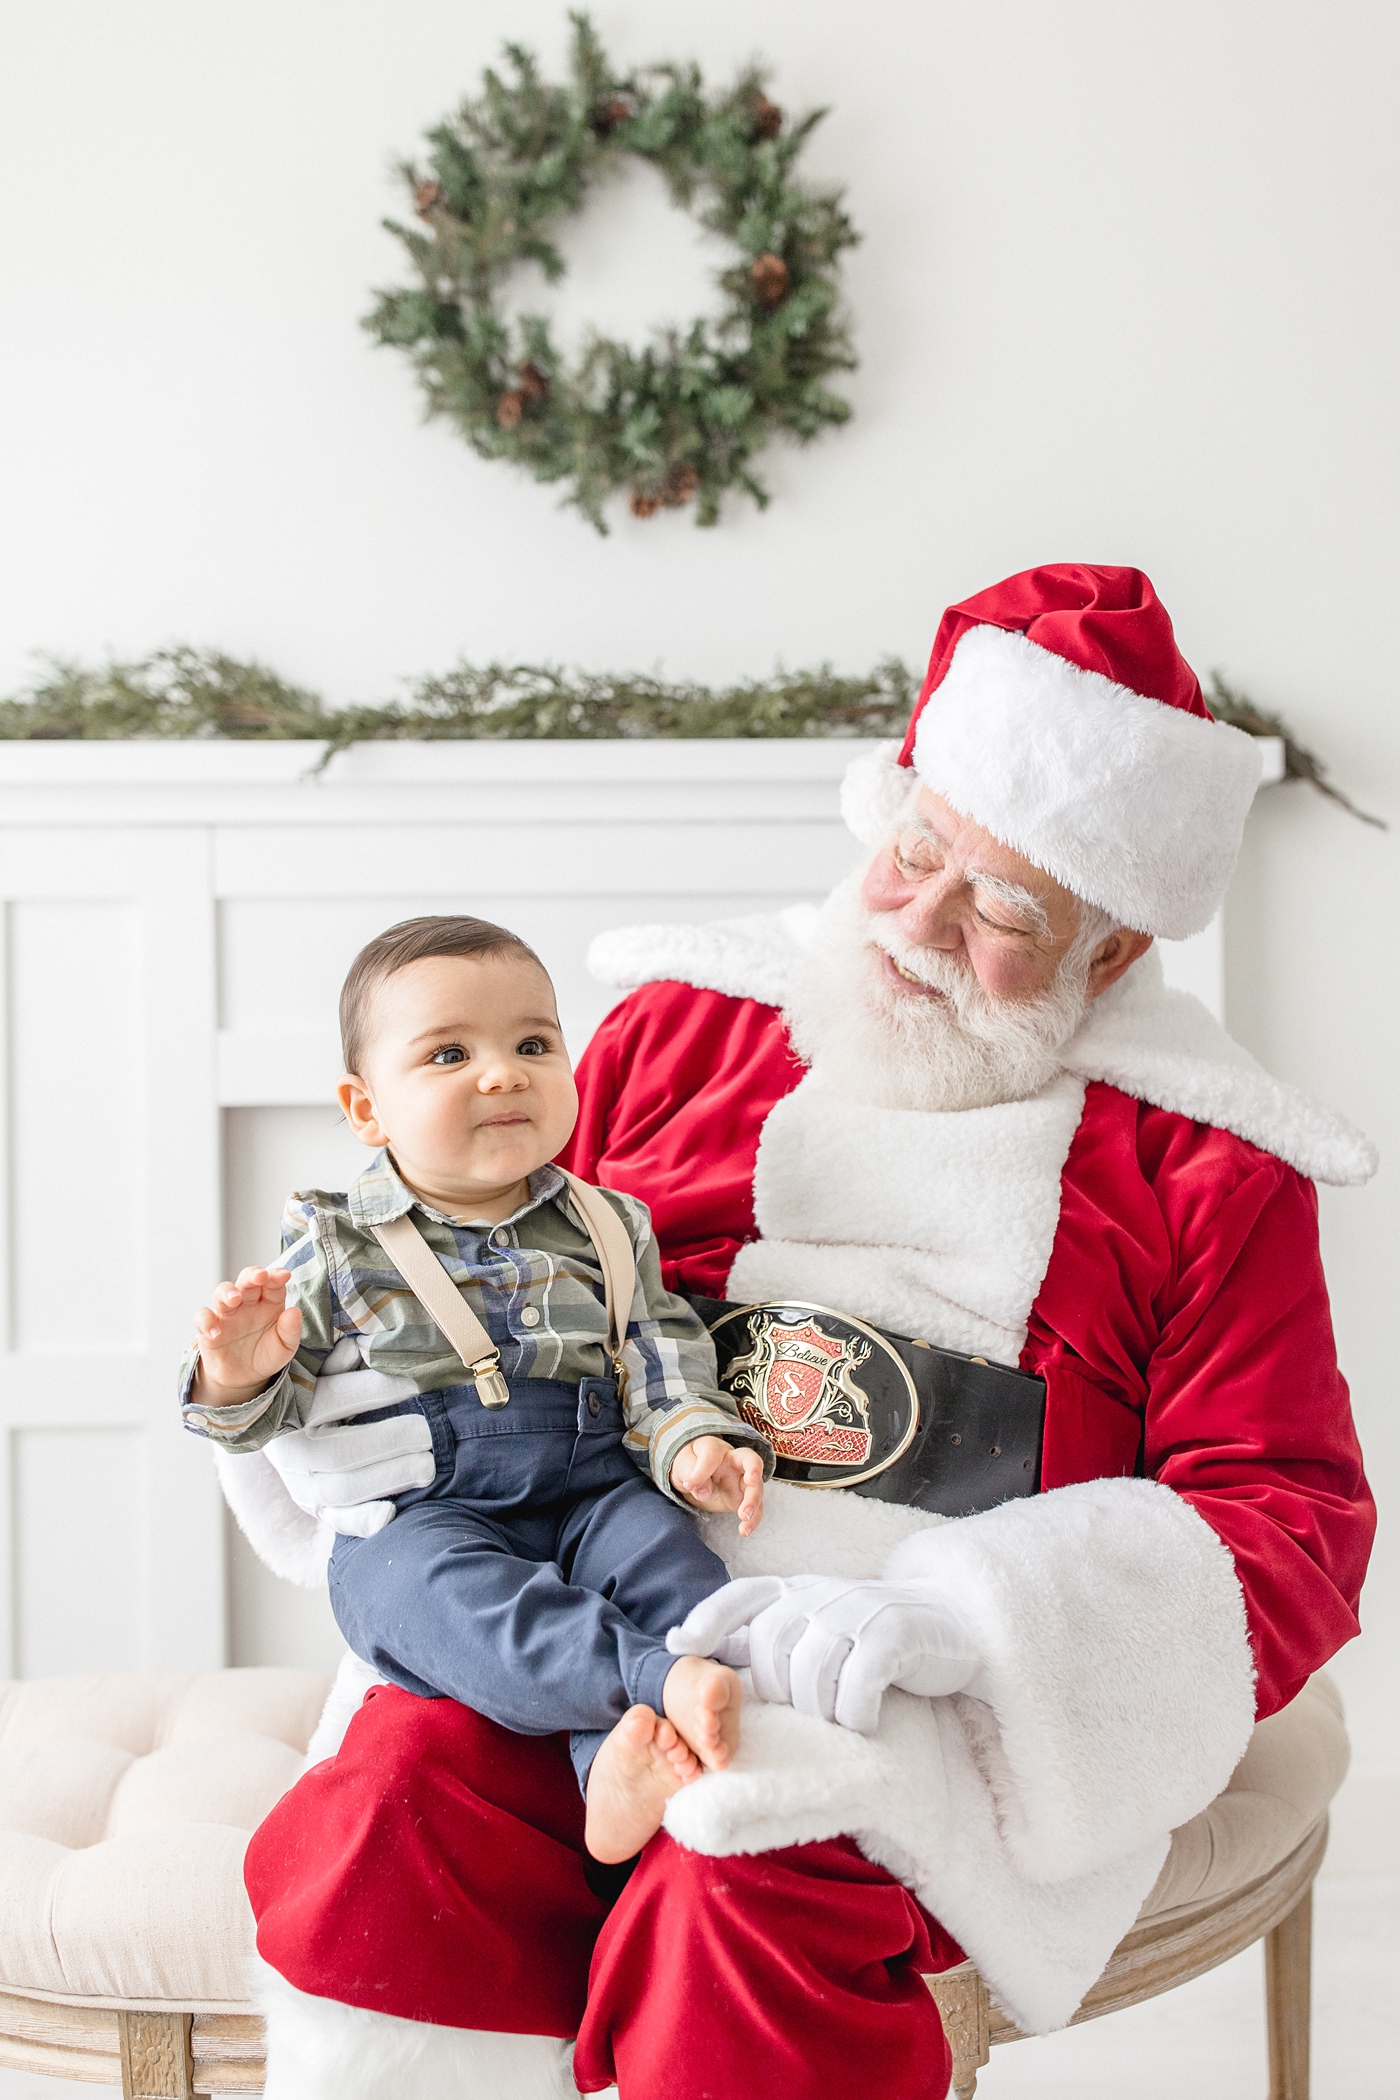 Baby boy sits in Santa Claus's lap. Photo by Ivanna Vidal Photography.